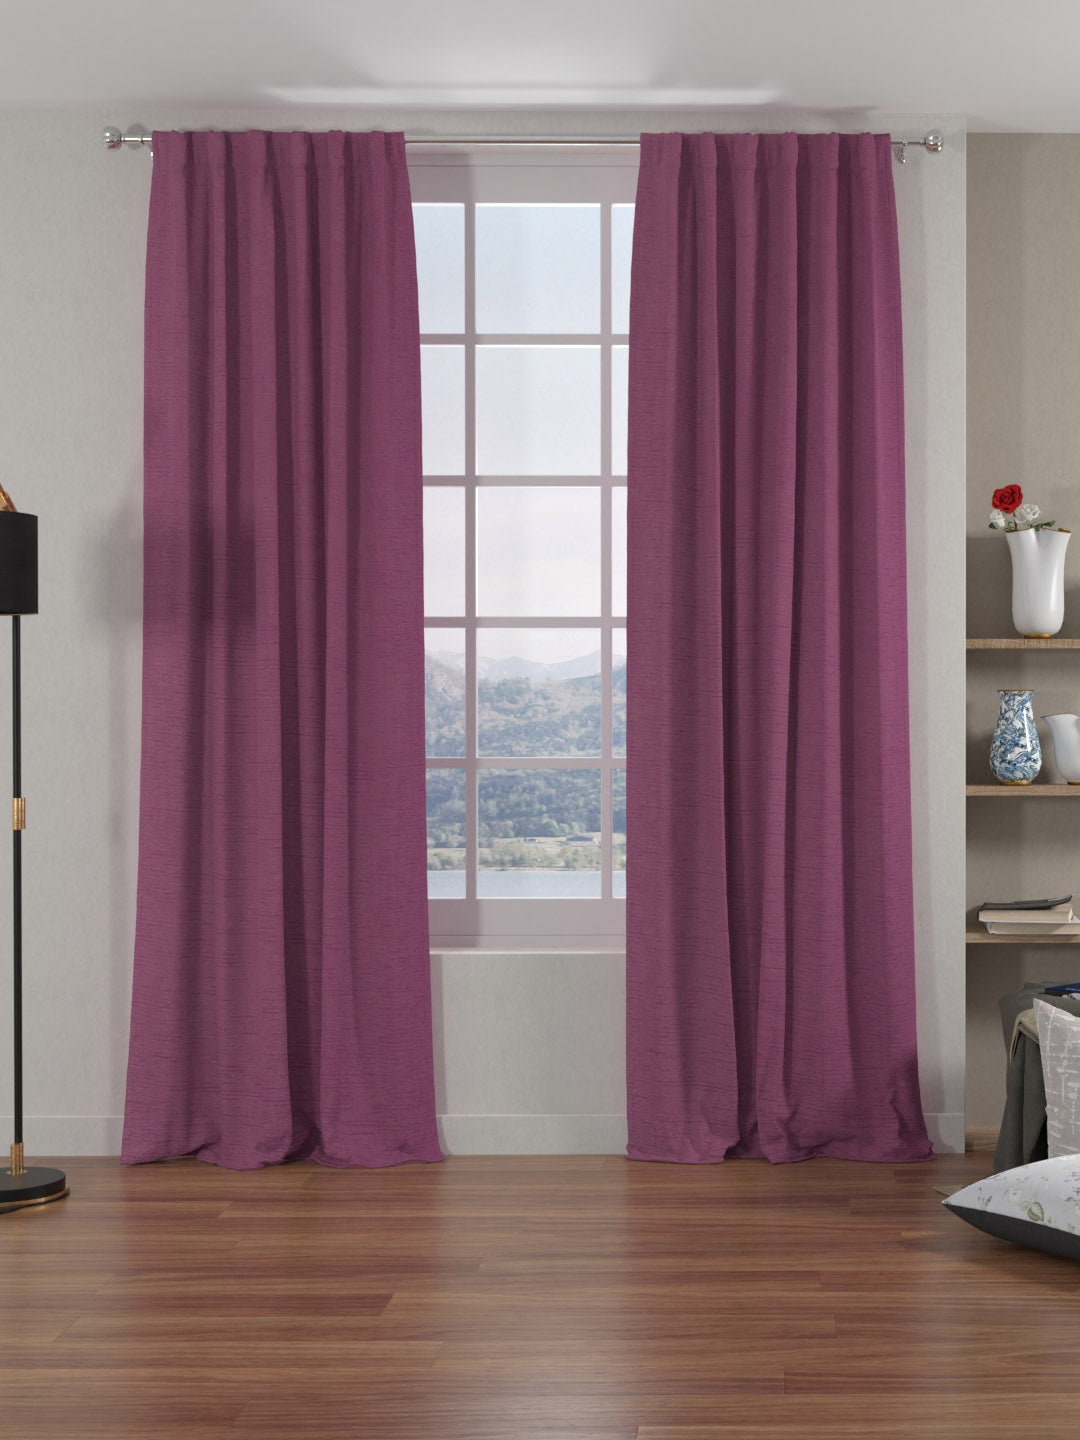 Grace Solids Opus 7 Ft Polyester Door Curtains Set Of 2 (Onion)